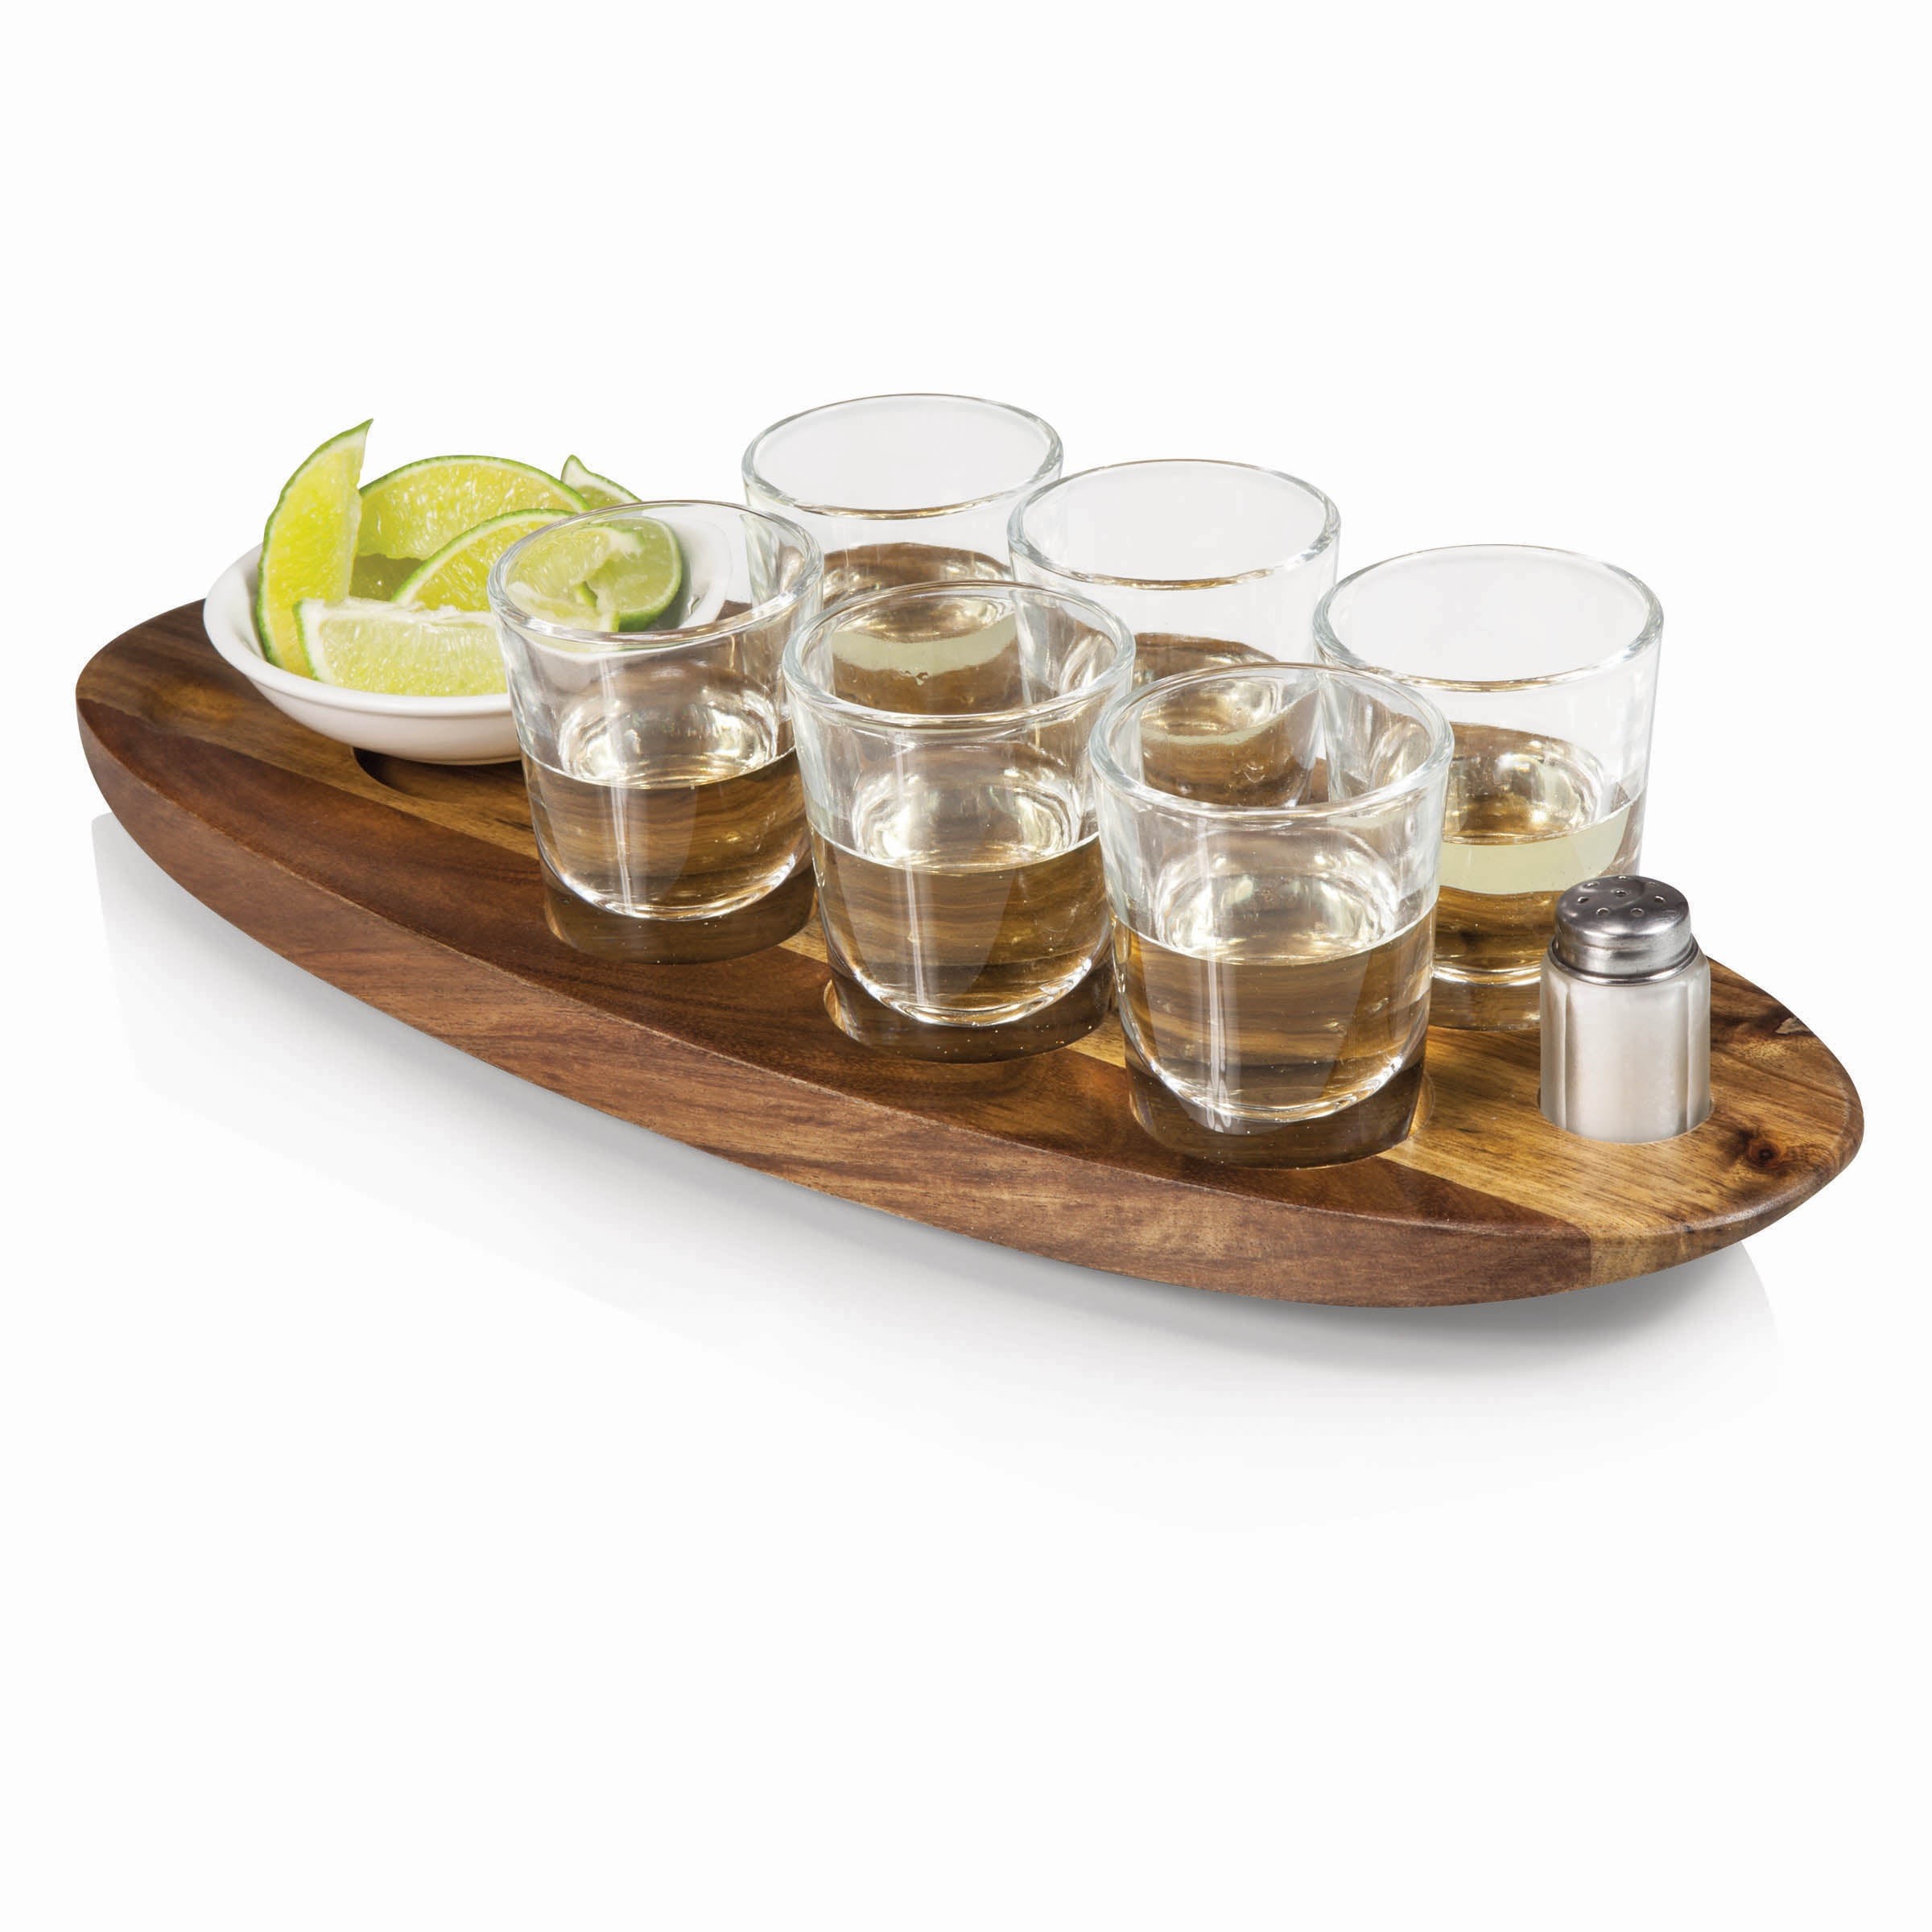 Cantinero Shot Glass Serving Set w/ Tray